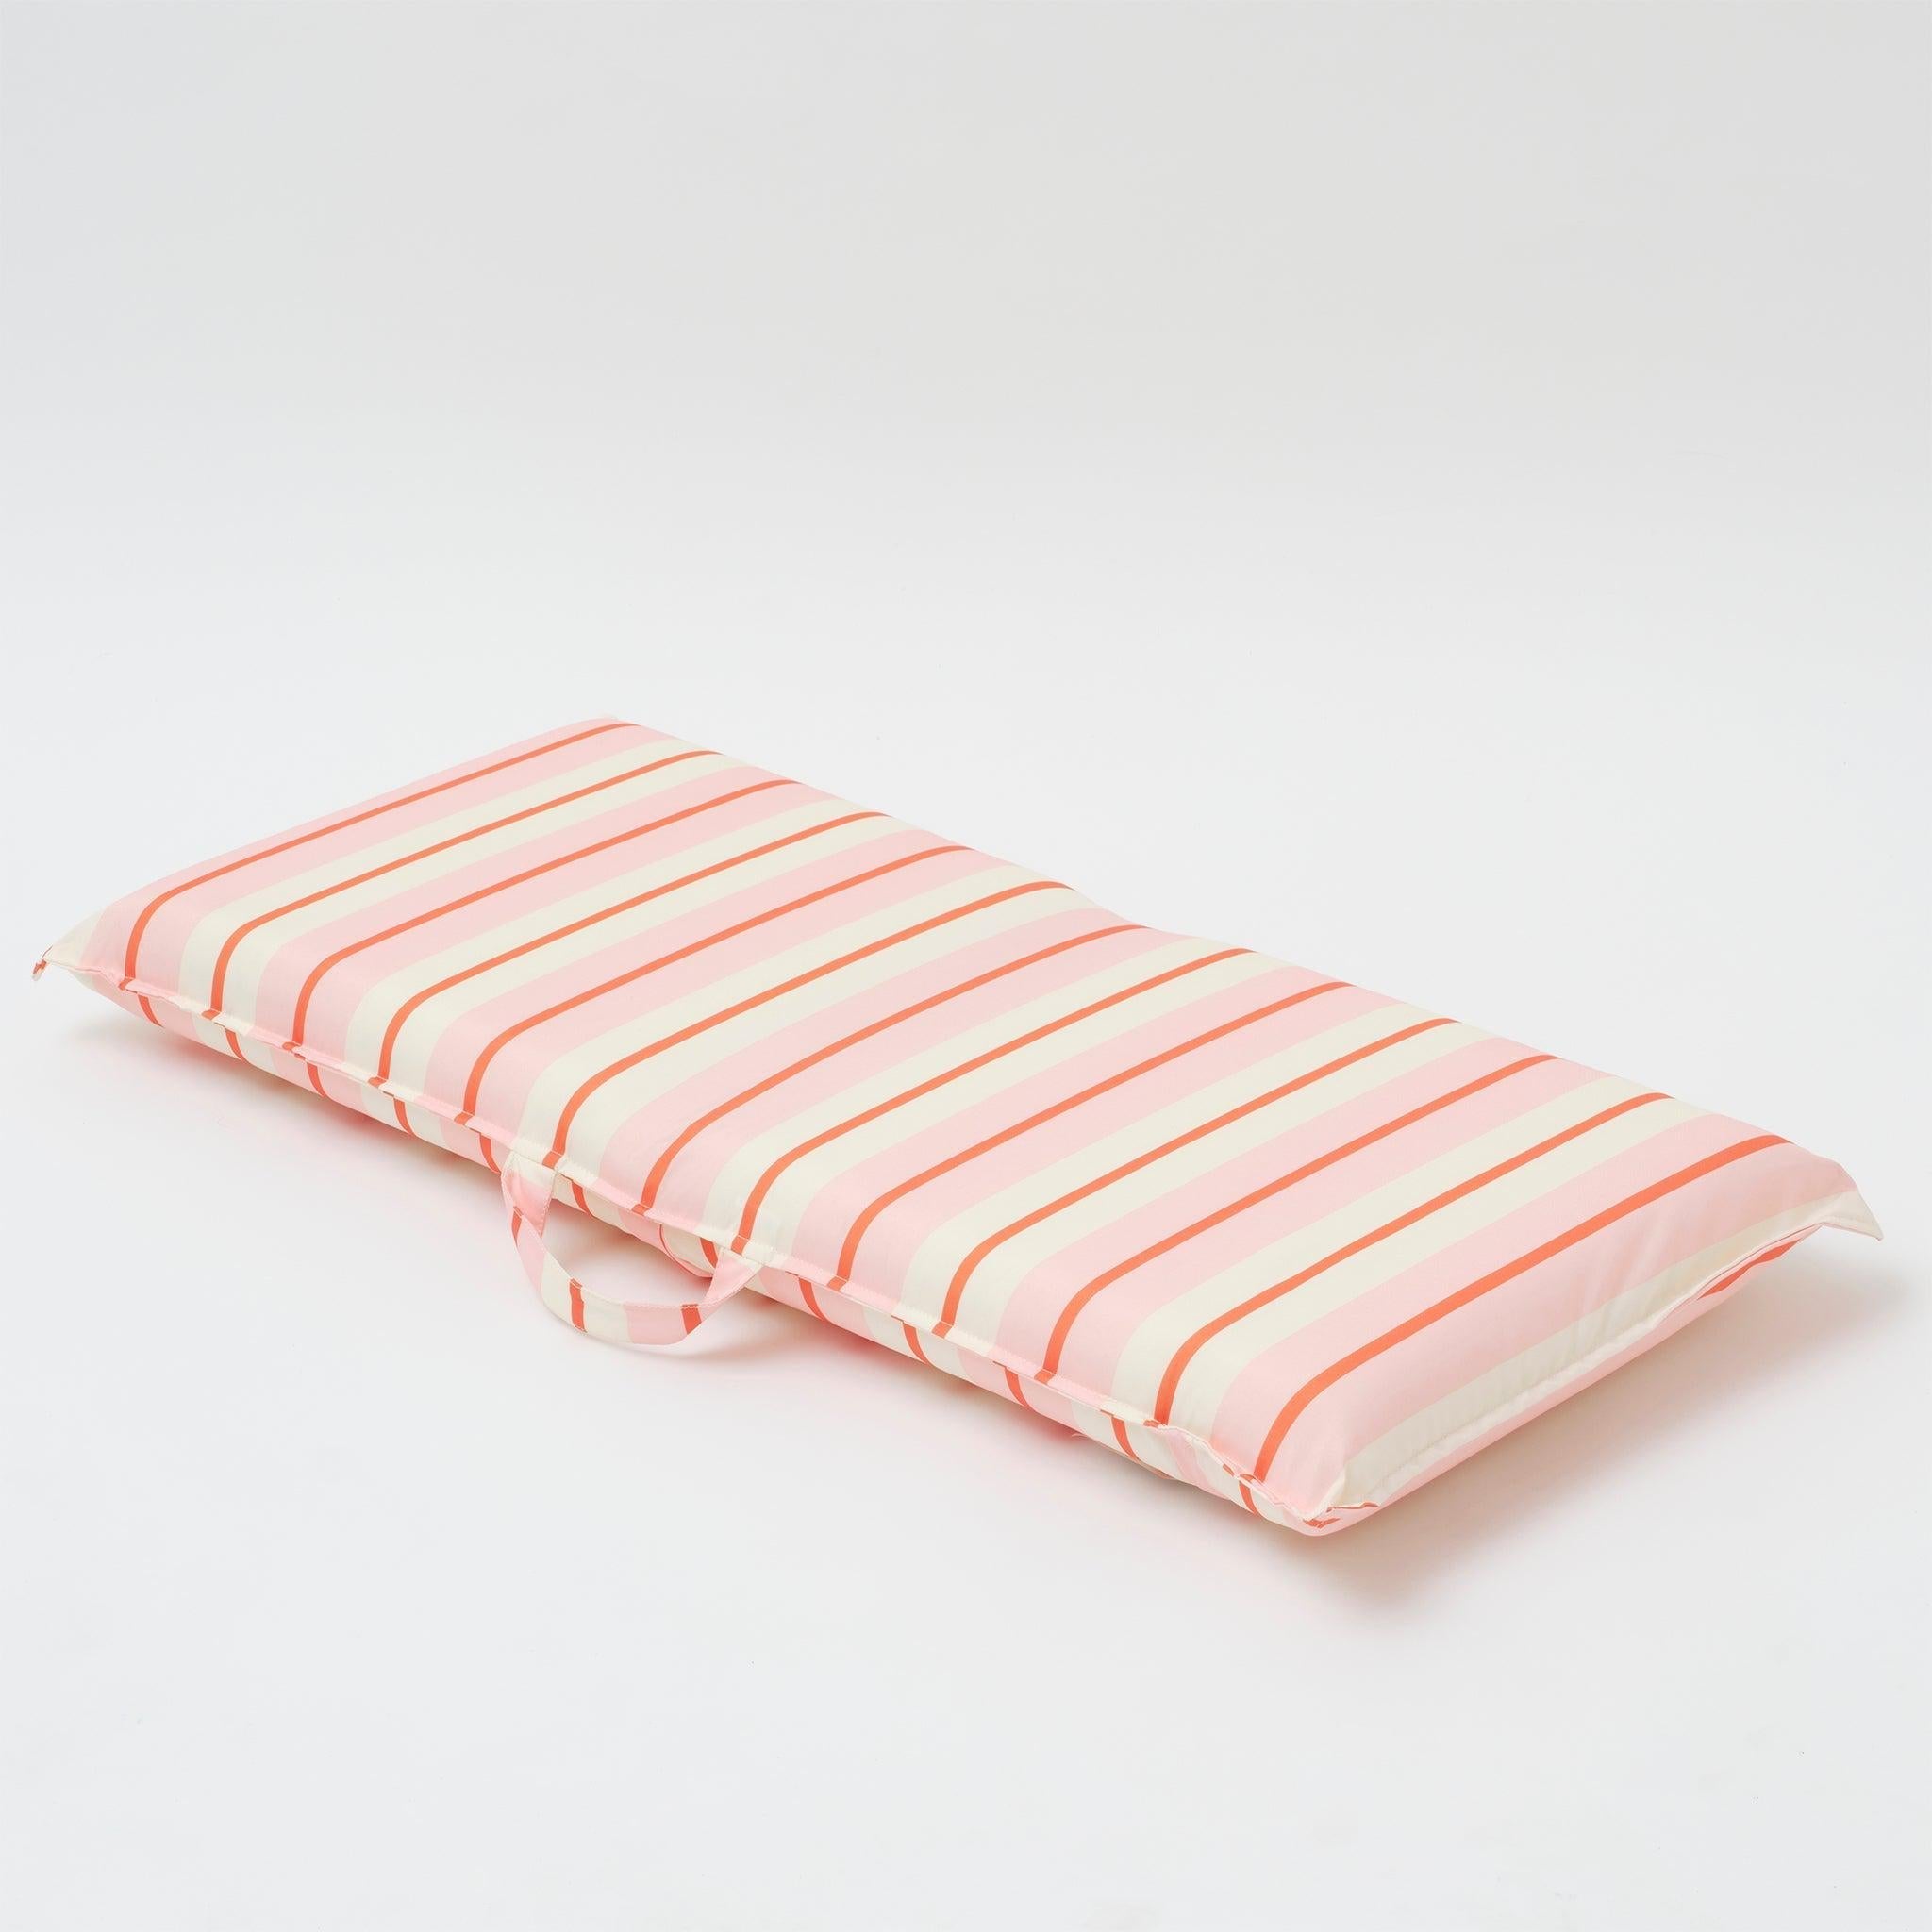 Folding Seat Summer Stripe Strawberry Sorbet-Travel & Outdoors-Sunny Life-The Bay Room